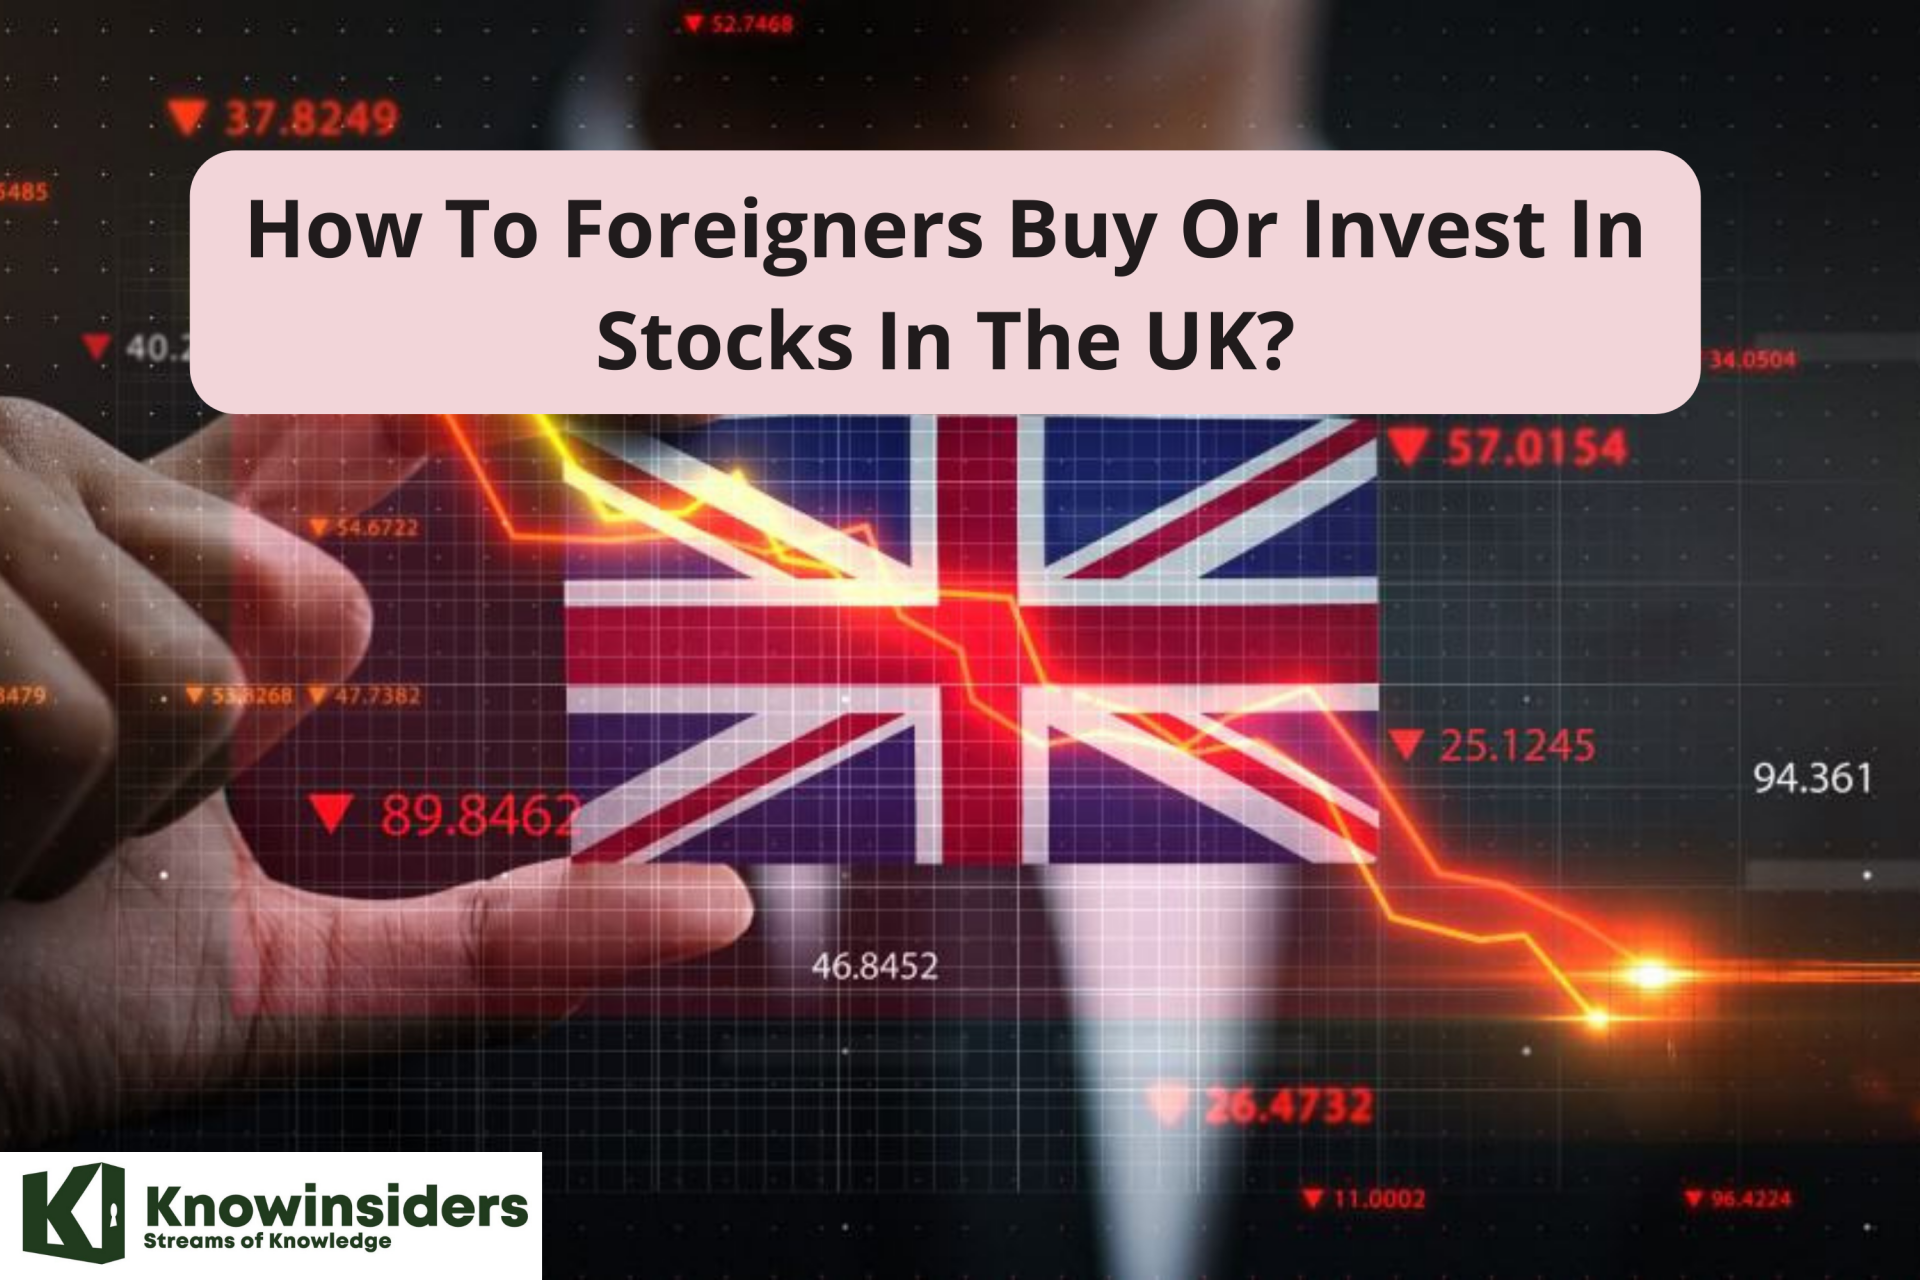 Can Foreigners Buy Or Invest In Stocks In The UK?